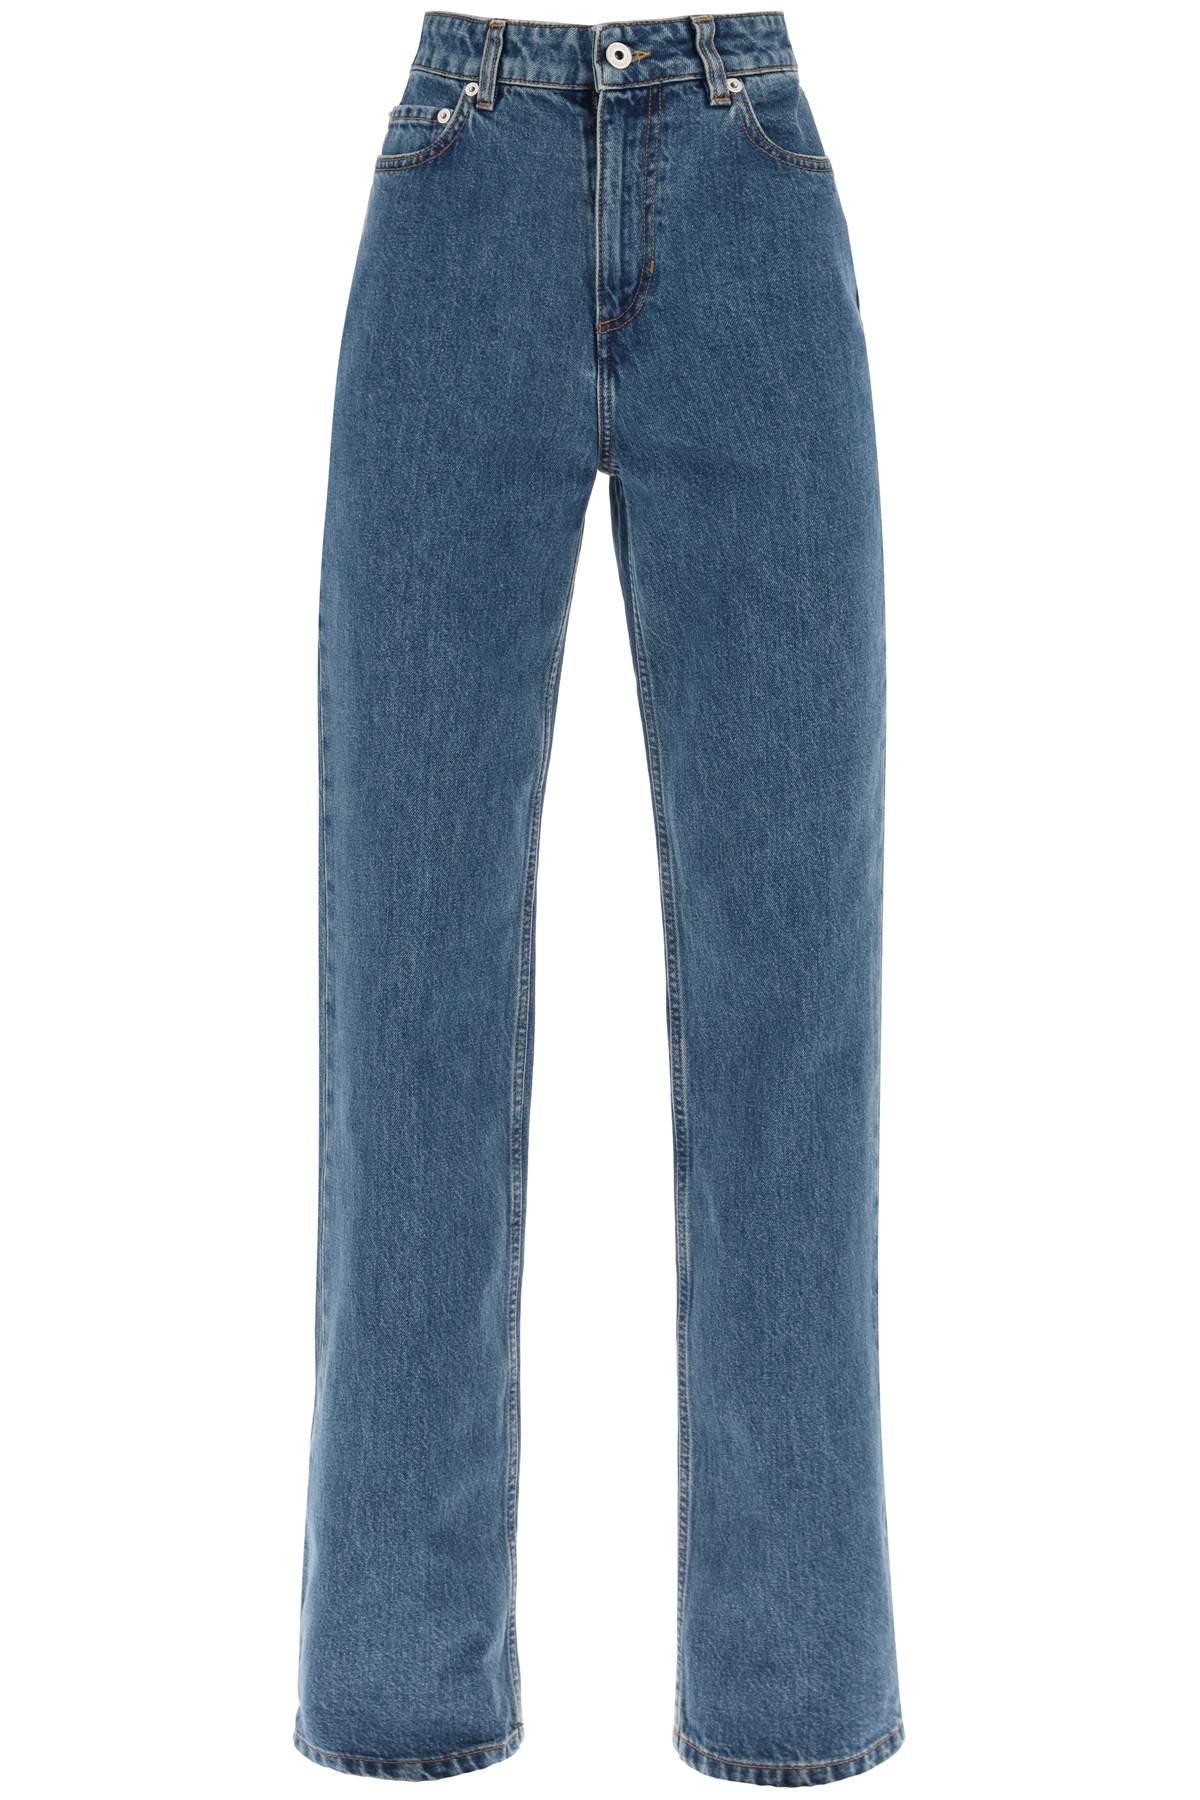 Burberry 'bergen' loose jeans with straight cut